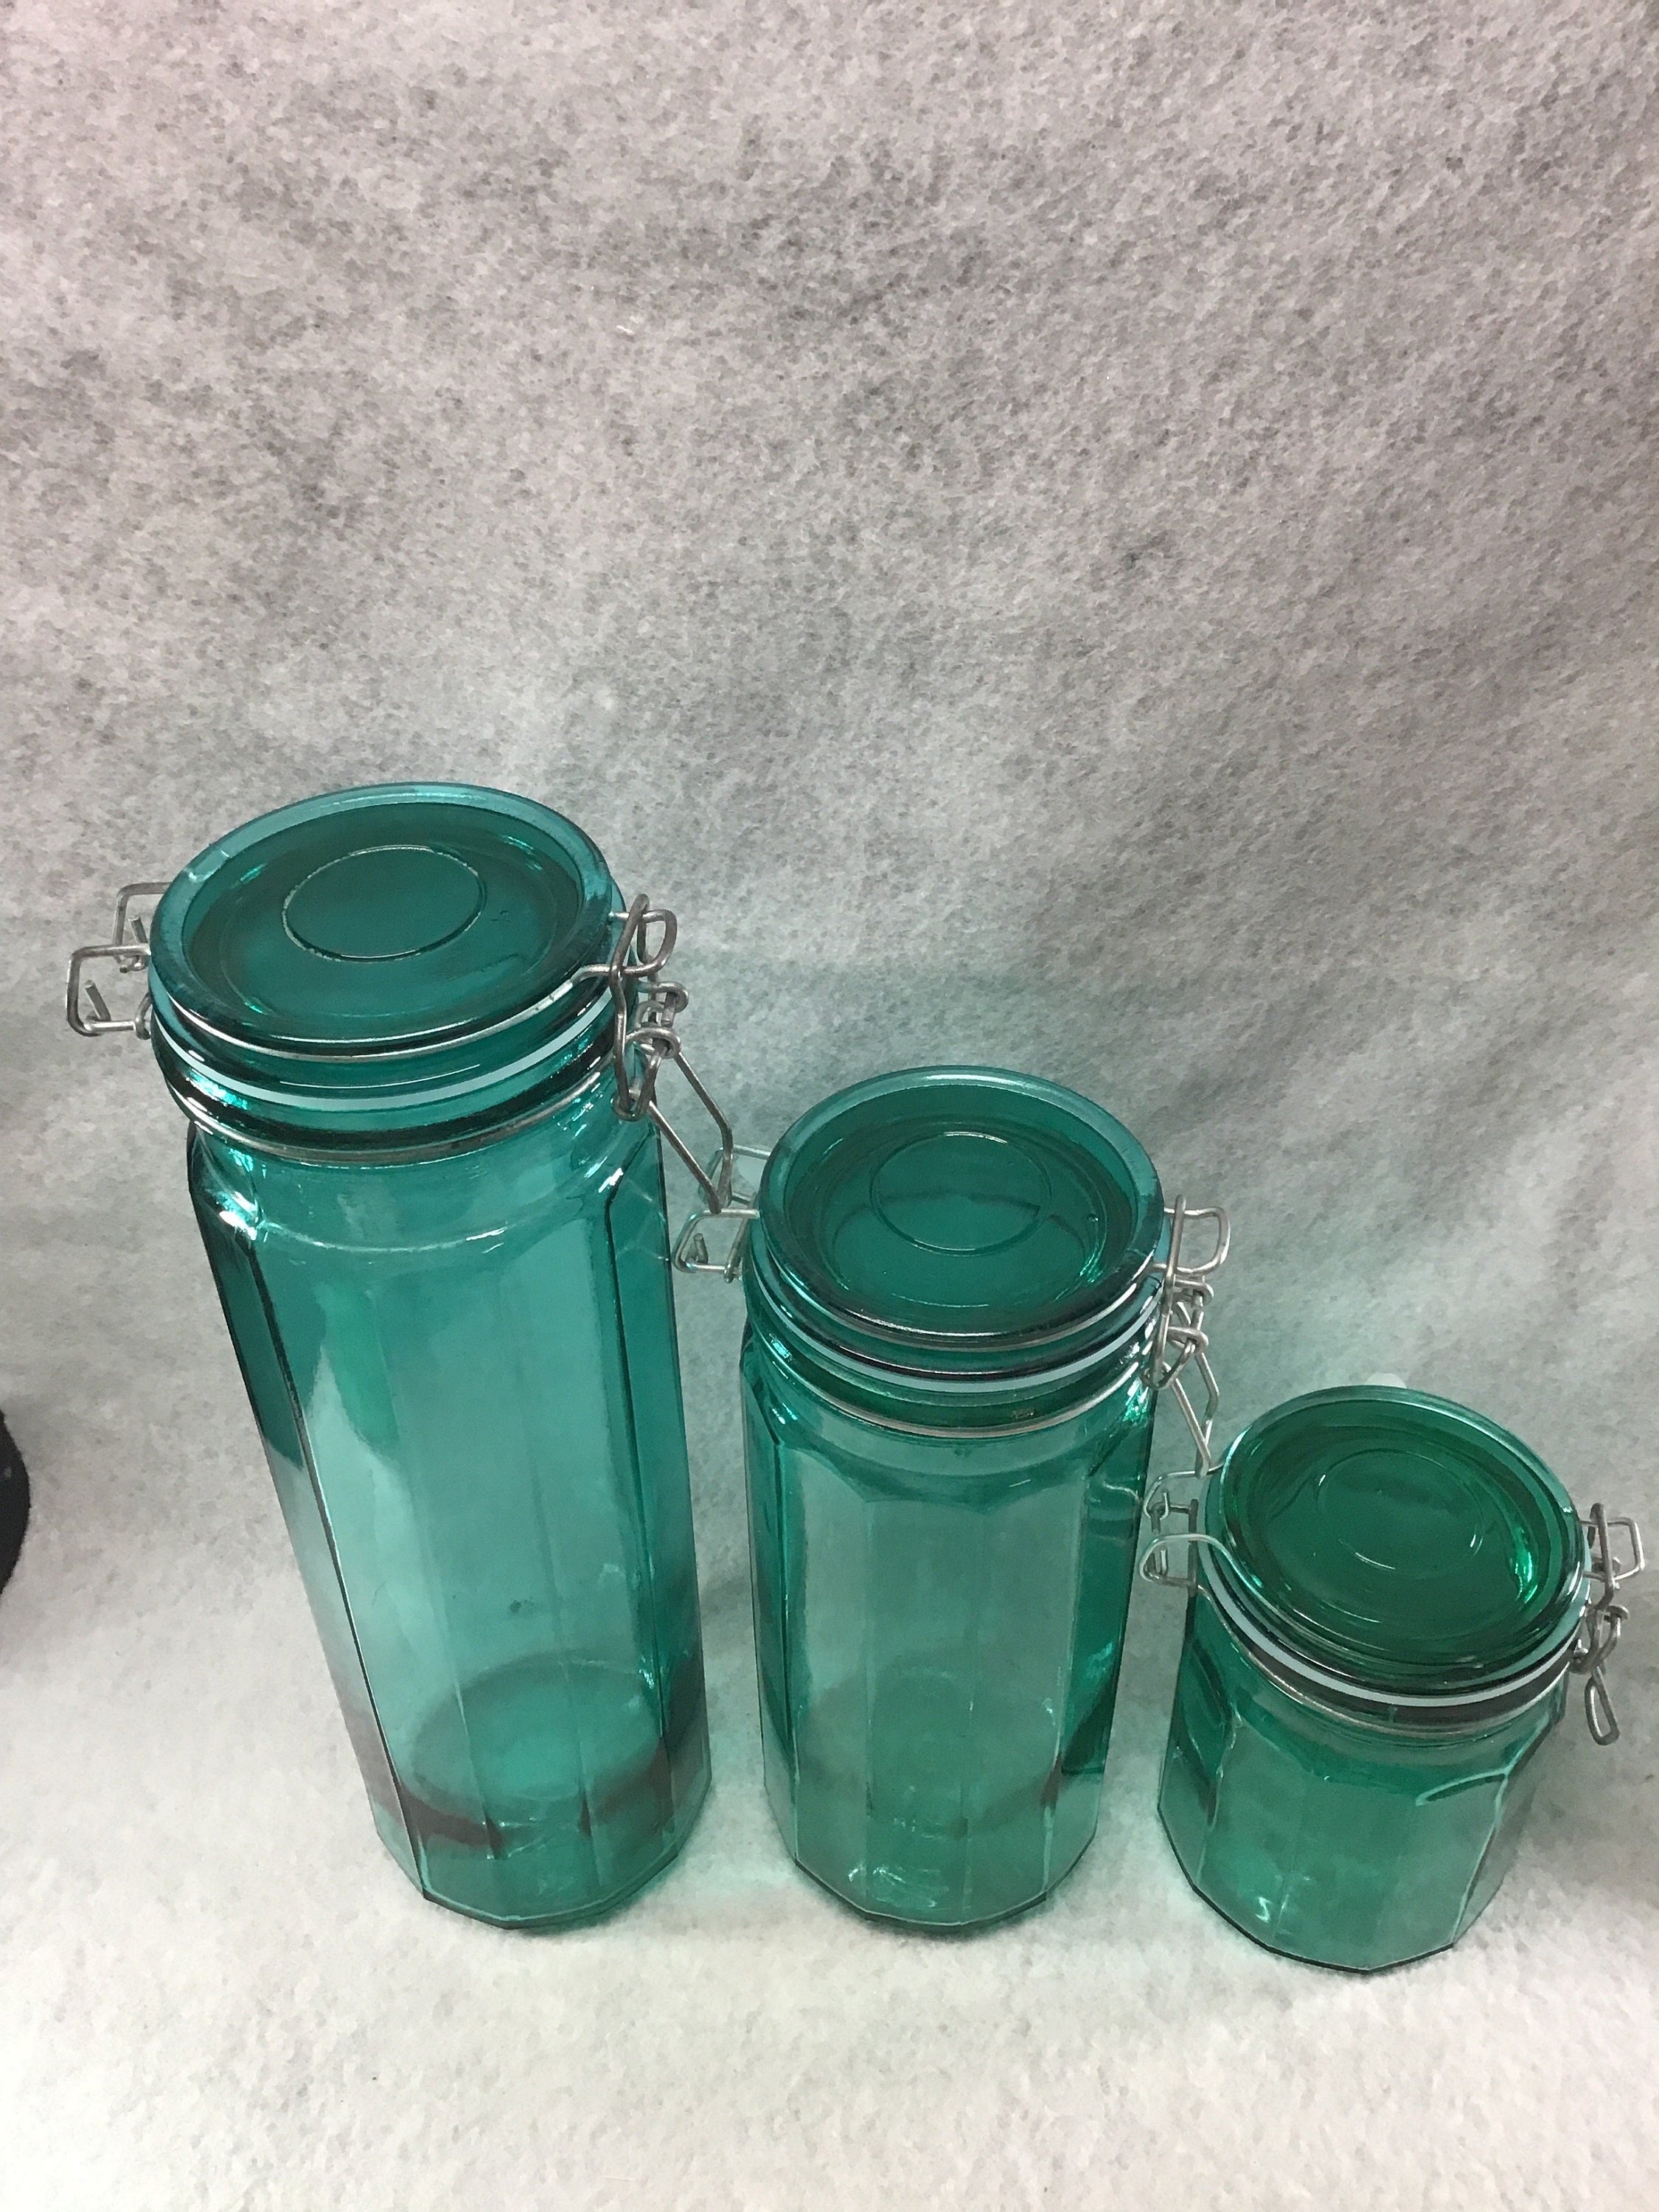 Tall Vintage Glass Jar With Wire Clamp Lid, Green Tint, 13 Inches